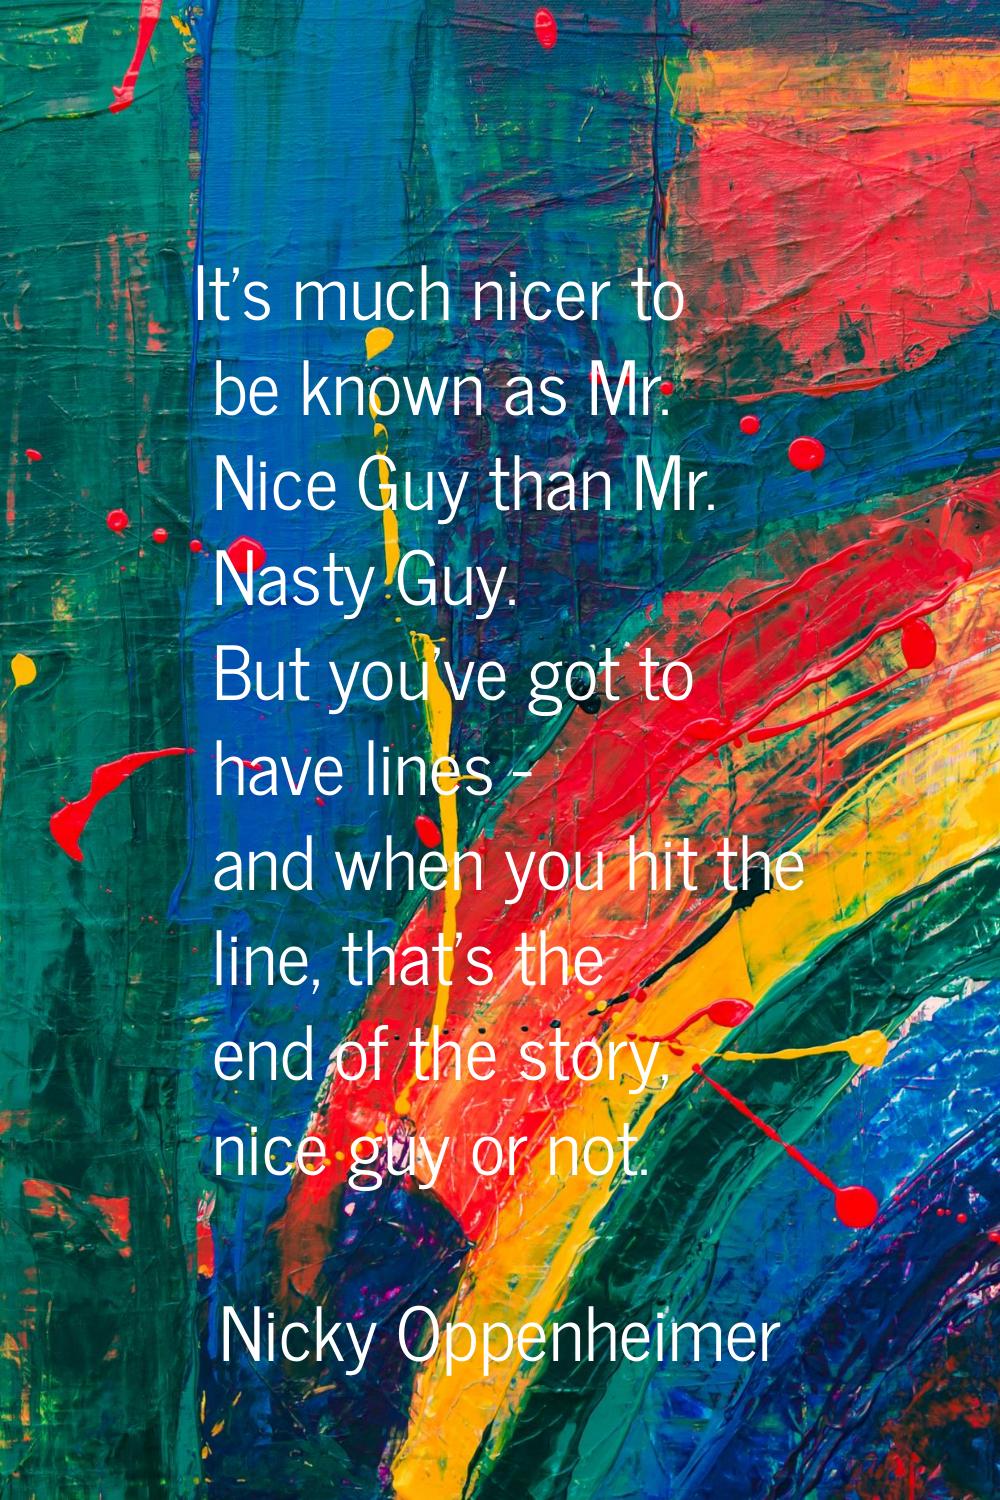 It's much nicer to be known as Mr. Nice Guy than Mr. Nasty Guy. But you've got to have lines - and 